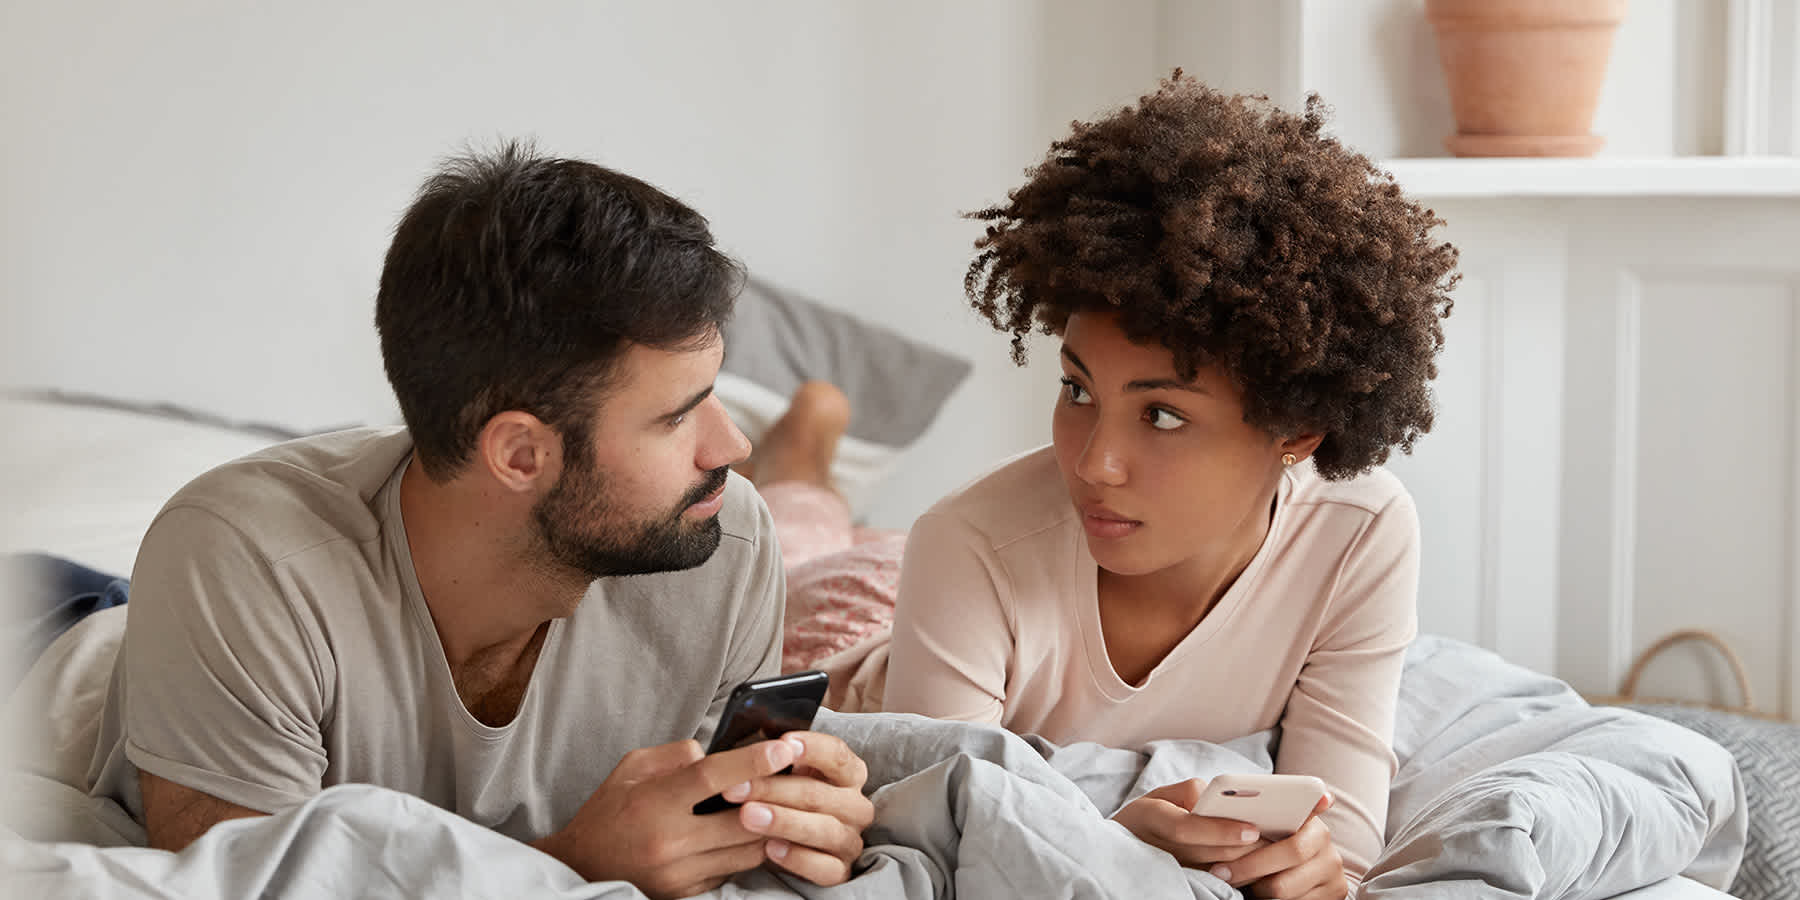 Couple in bed browsing phones and looking at each other while discussing syphilis vs. herpes